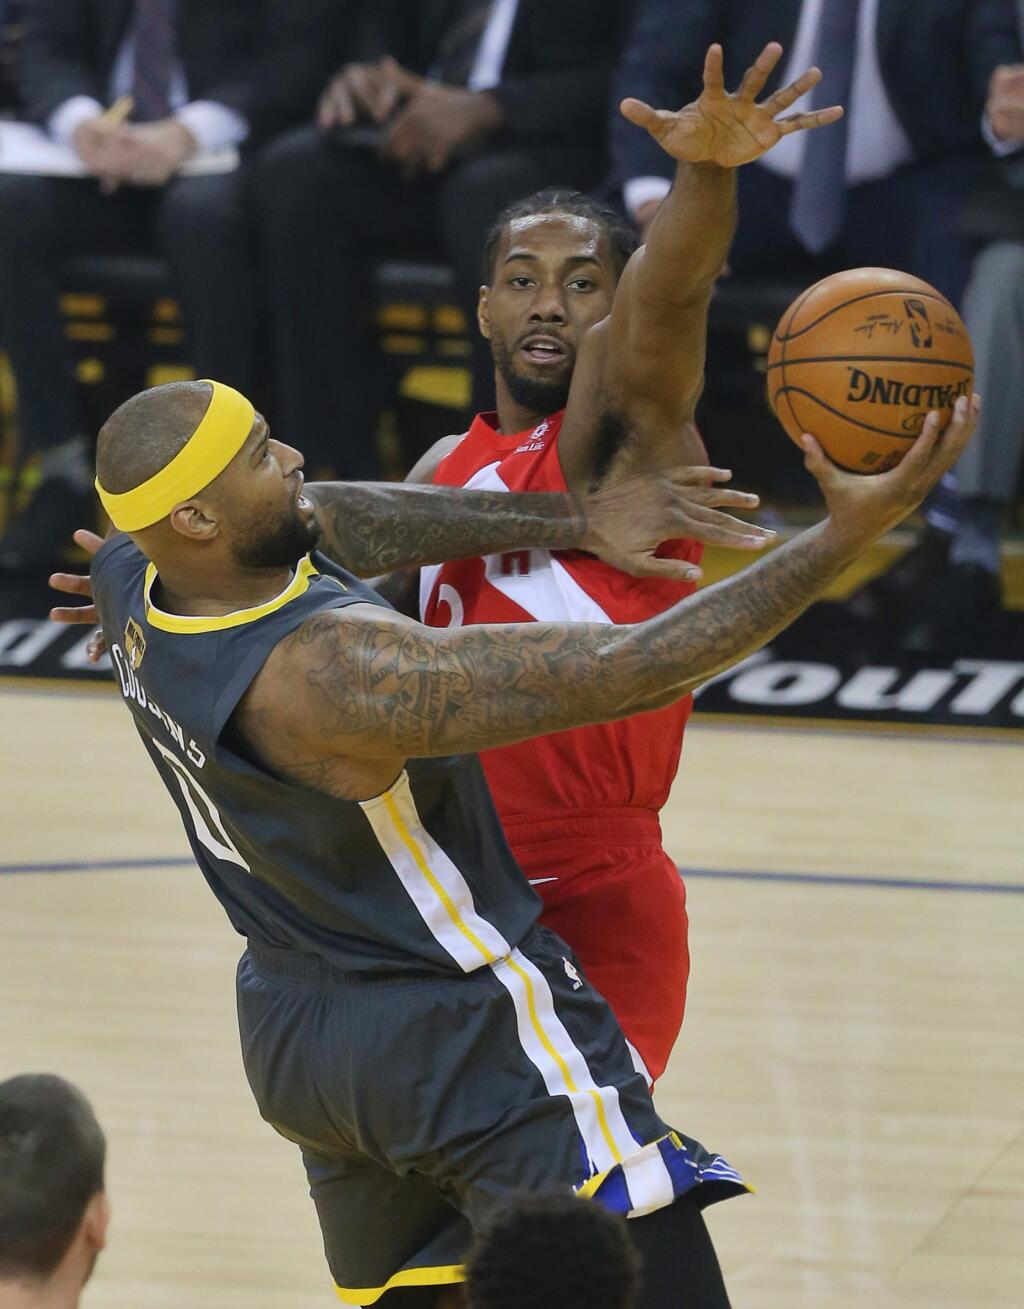 Golden State Warriors center DeMarcus Cousins lays the ball up against Toronto Raptors forward Kawhi Leonard during game 4 of the NBA Finals in Oakland on Friday, June 7, 2019. (Christopher Chung/ The Press Democrat)